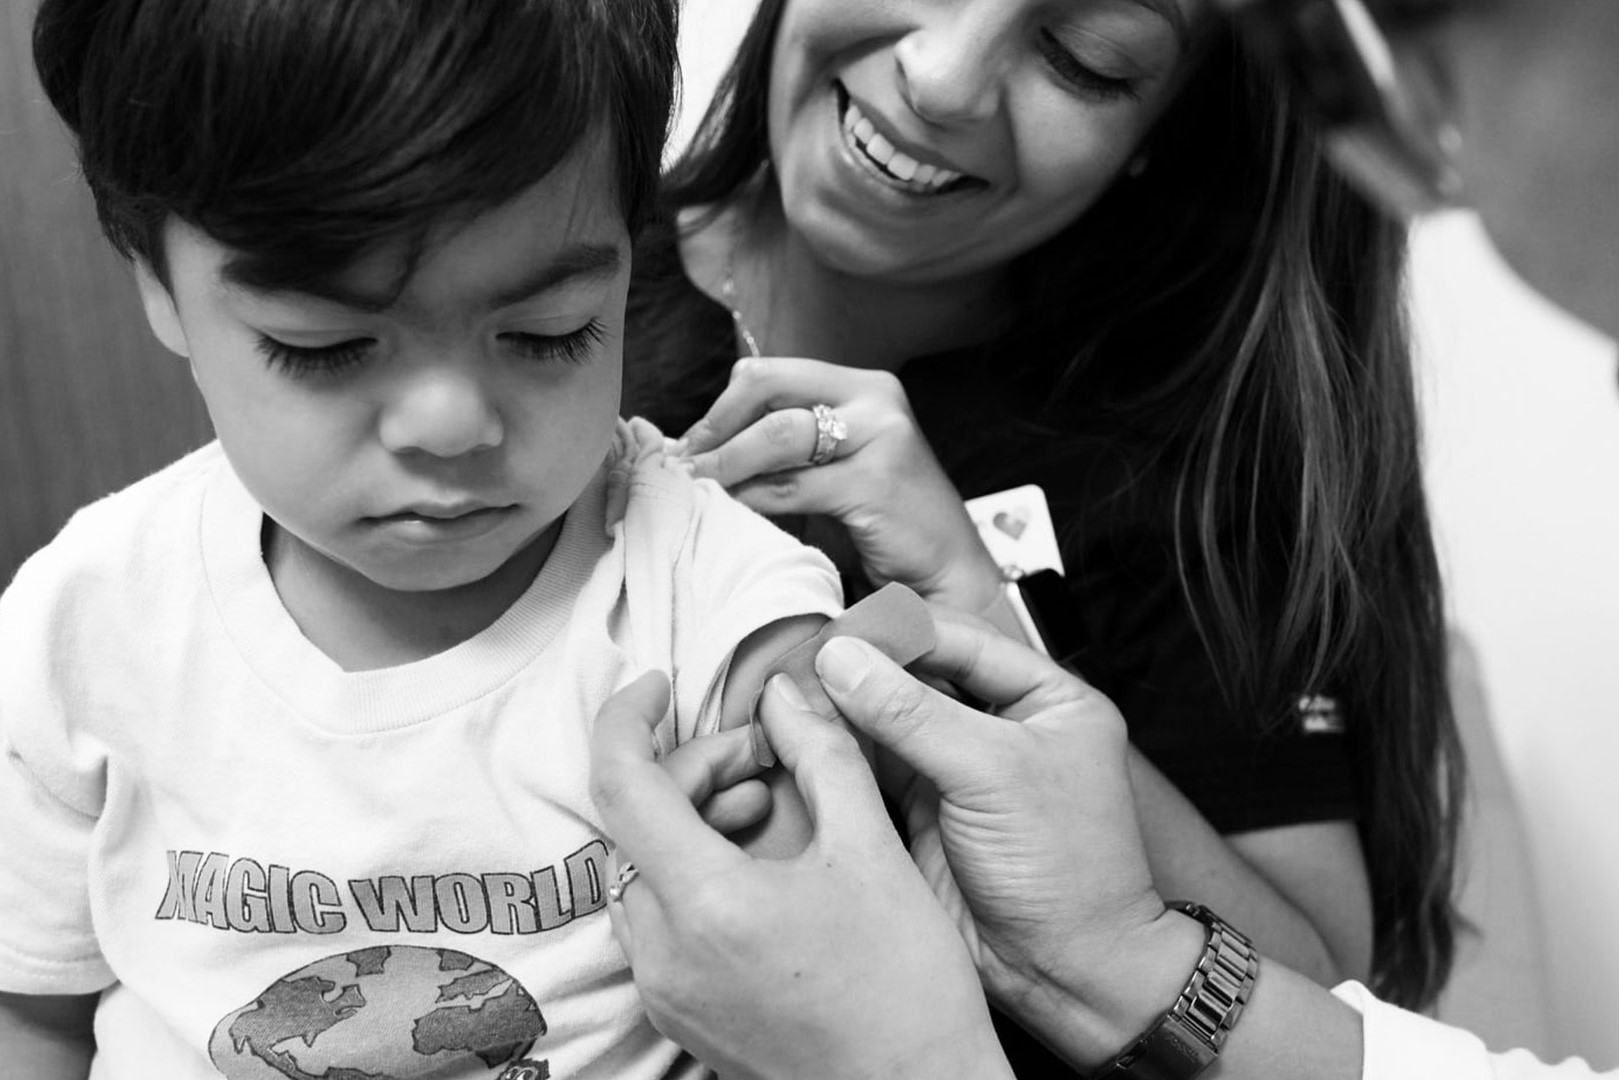 An image of an individual with a smile, holding a young person while they receive a vaccination jab.